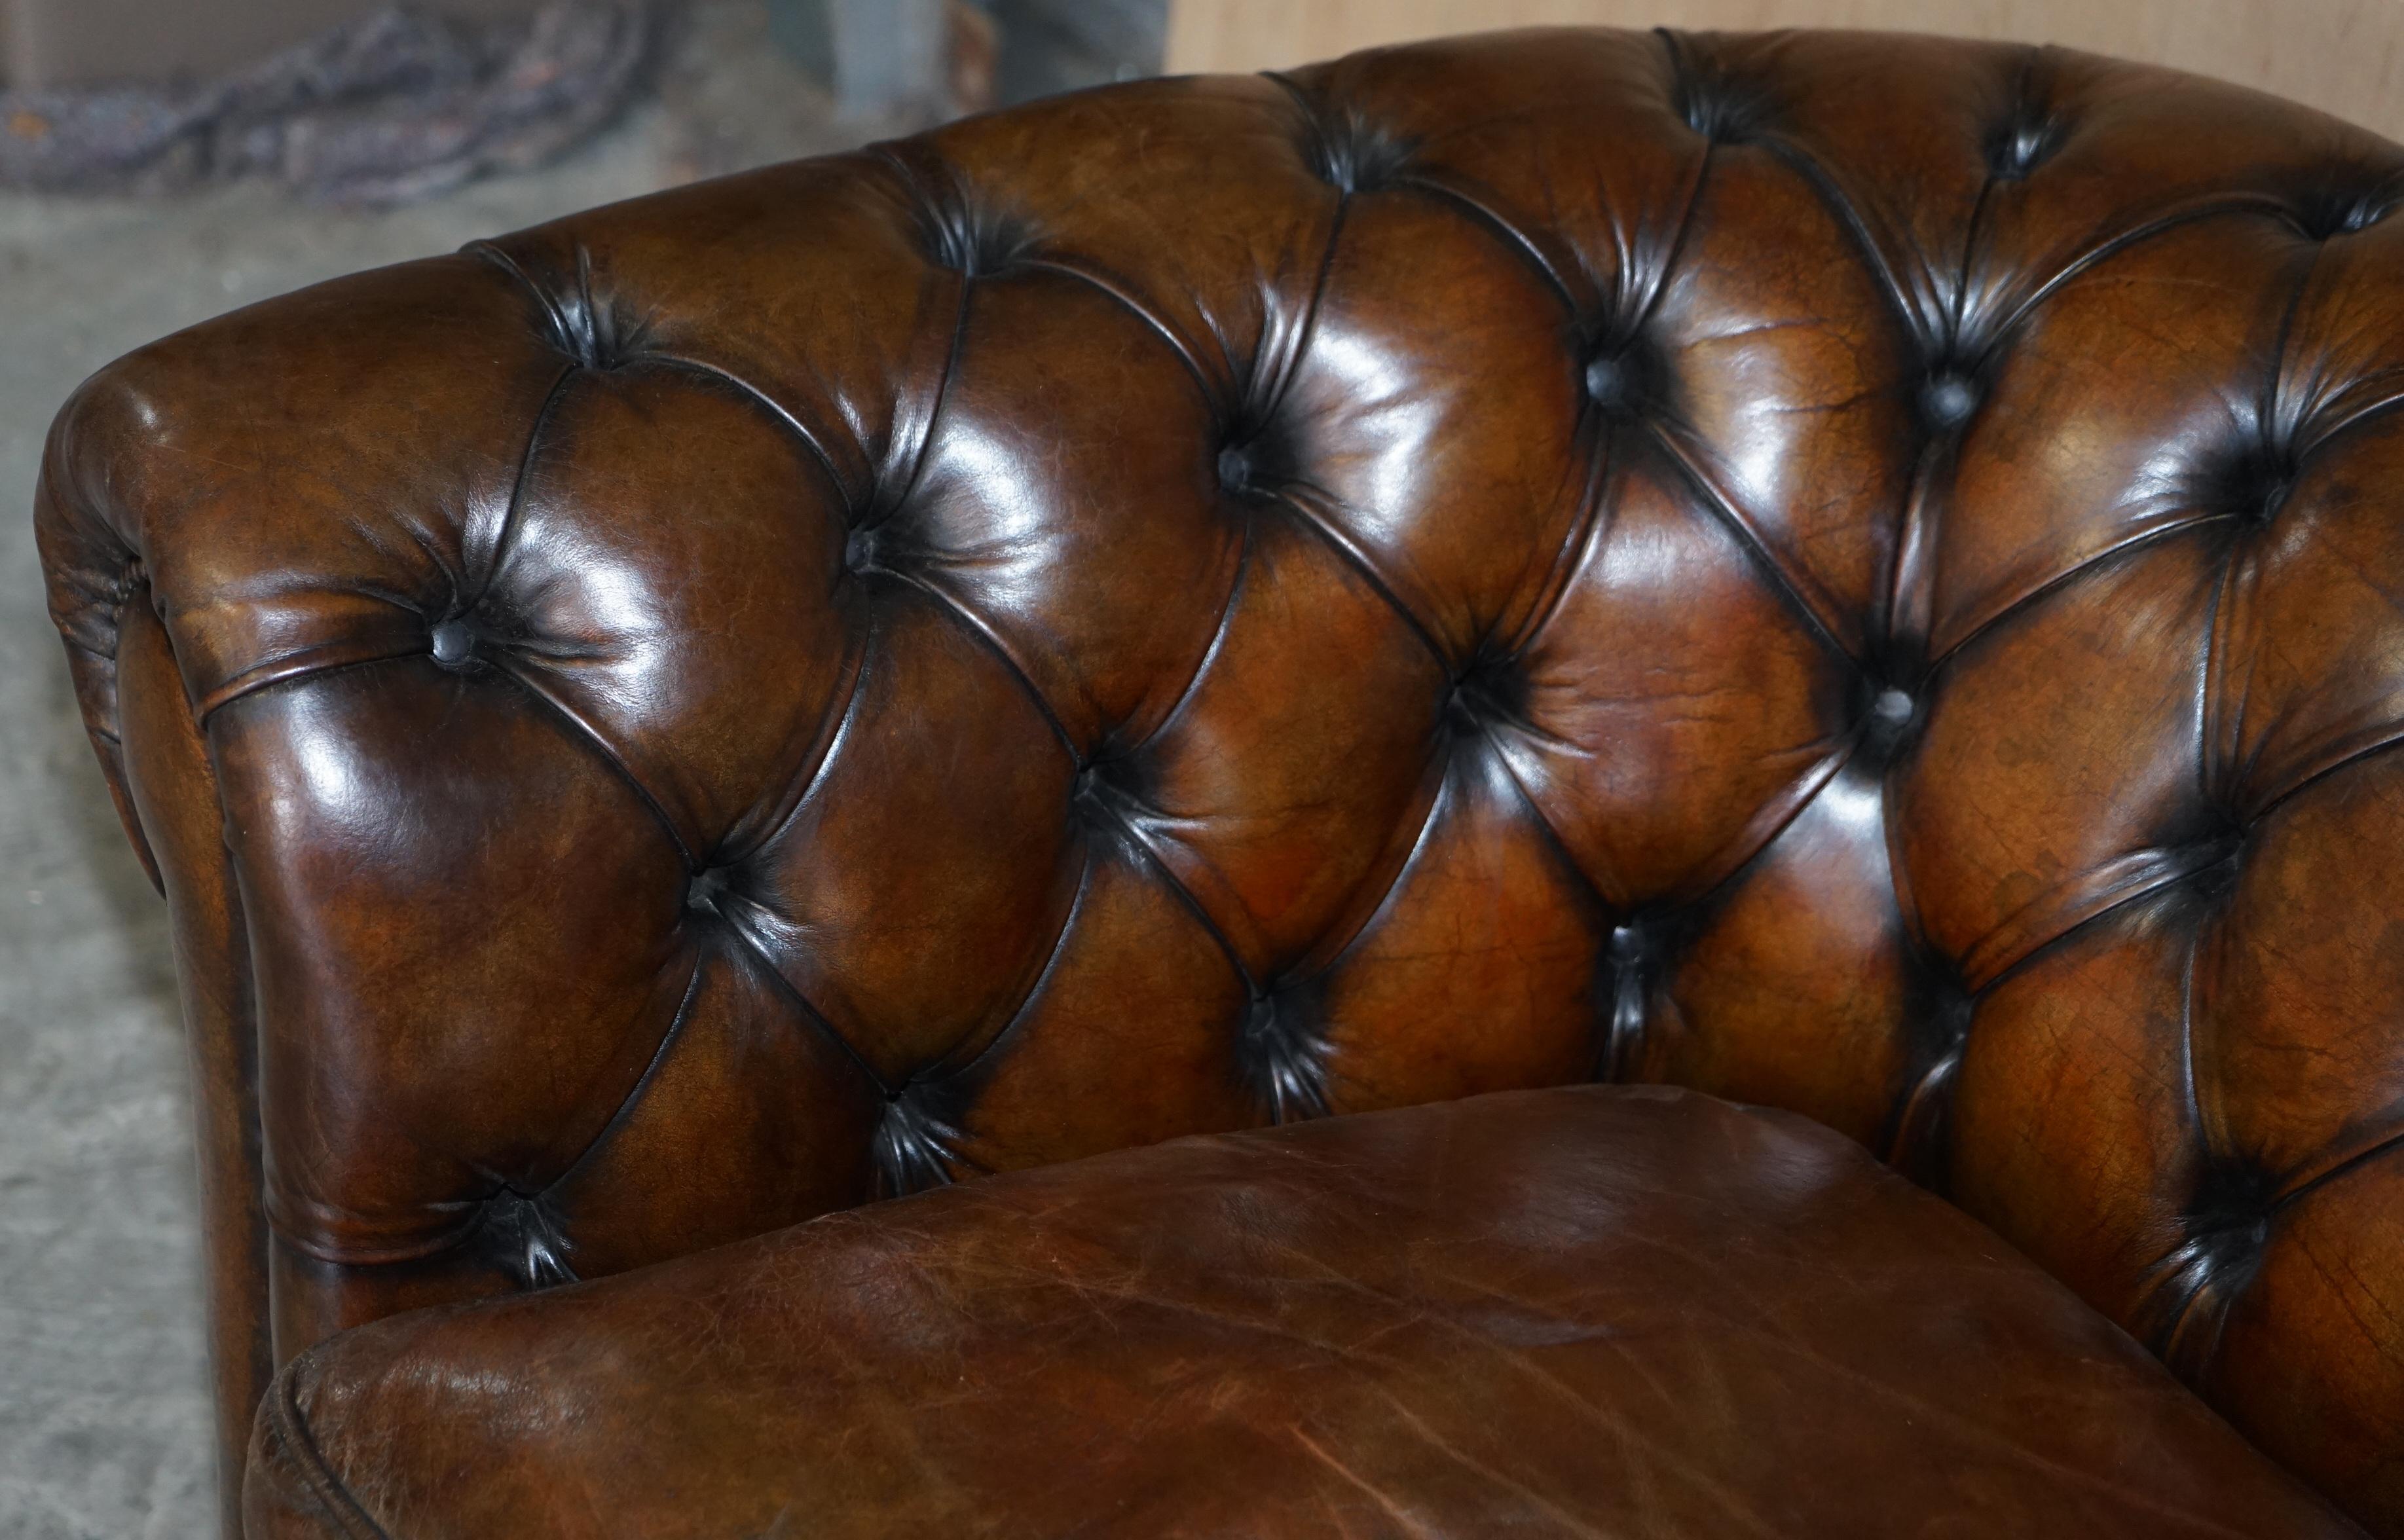 Stunning Antique Fully Restored Cigar Brown Leather Chesterfield Sofa Walnut For Sale 1